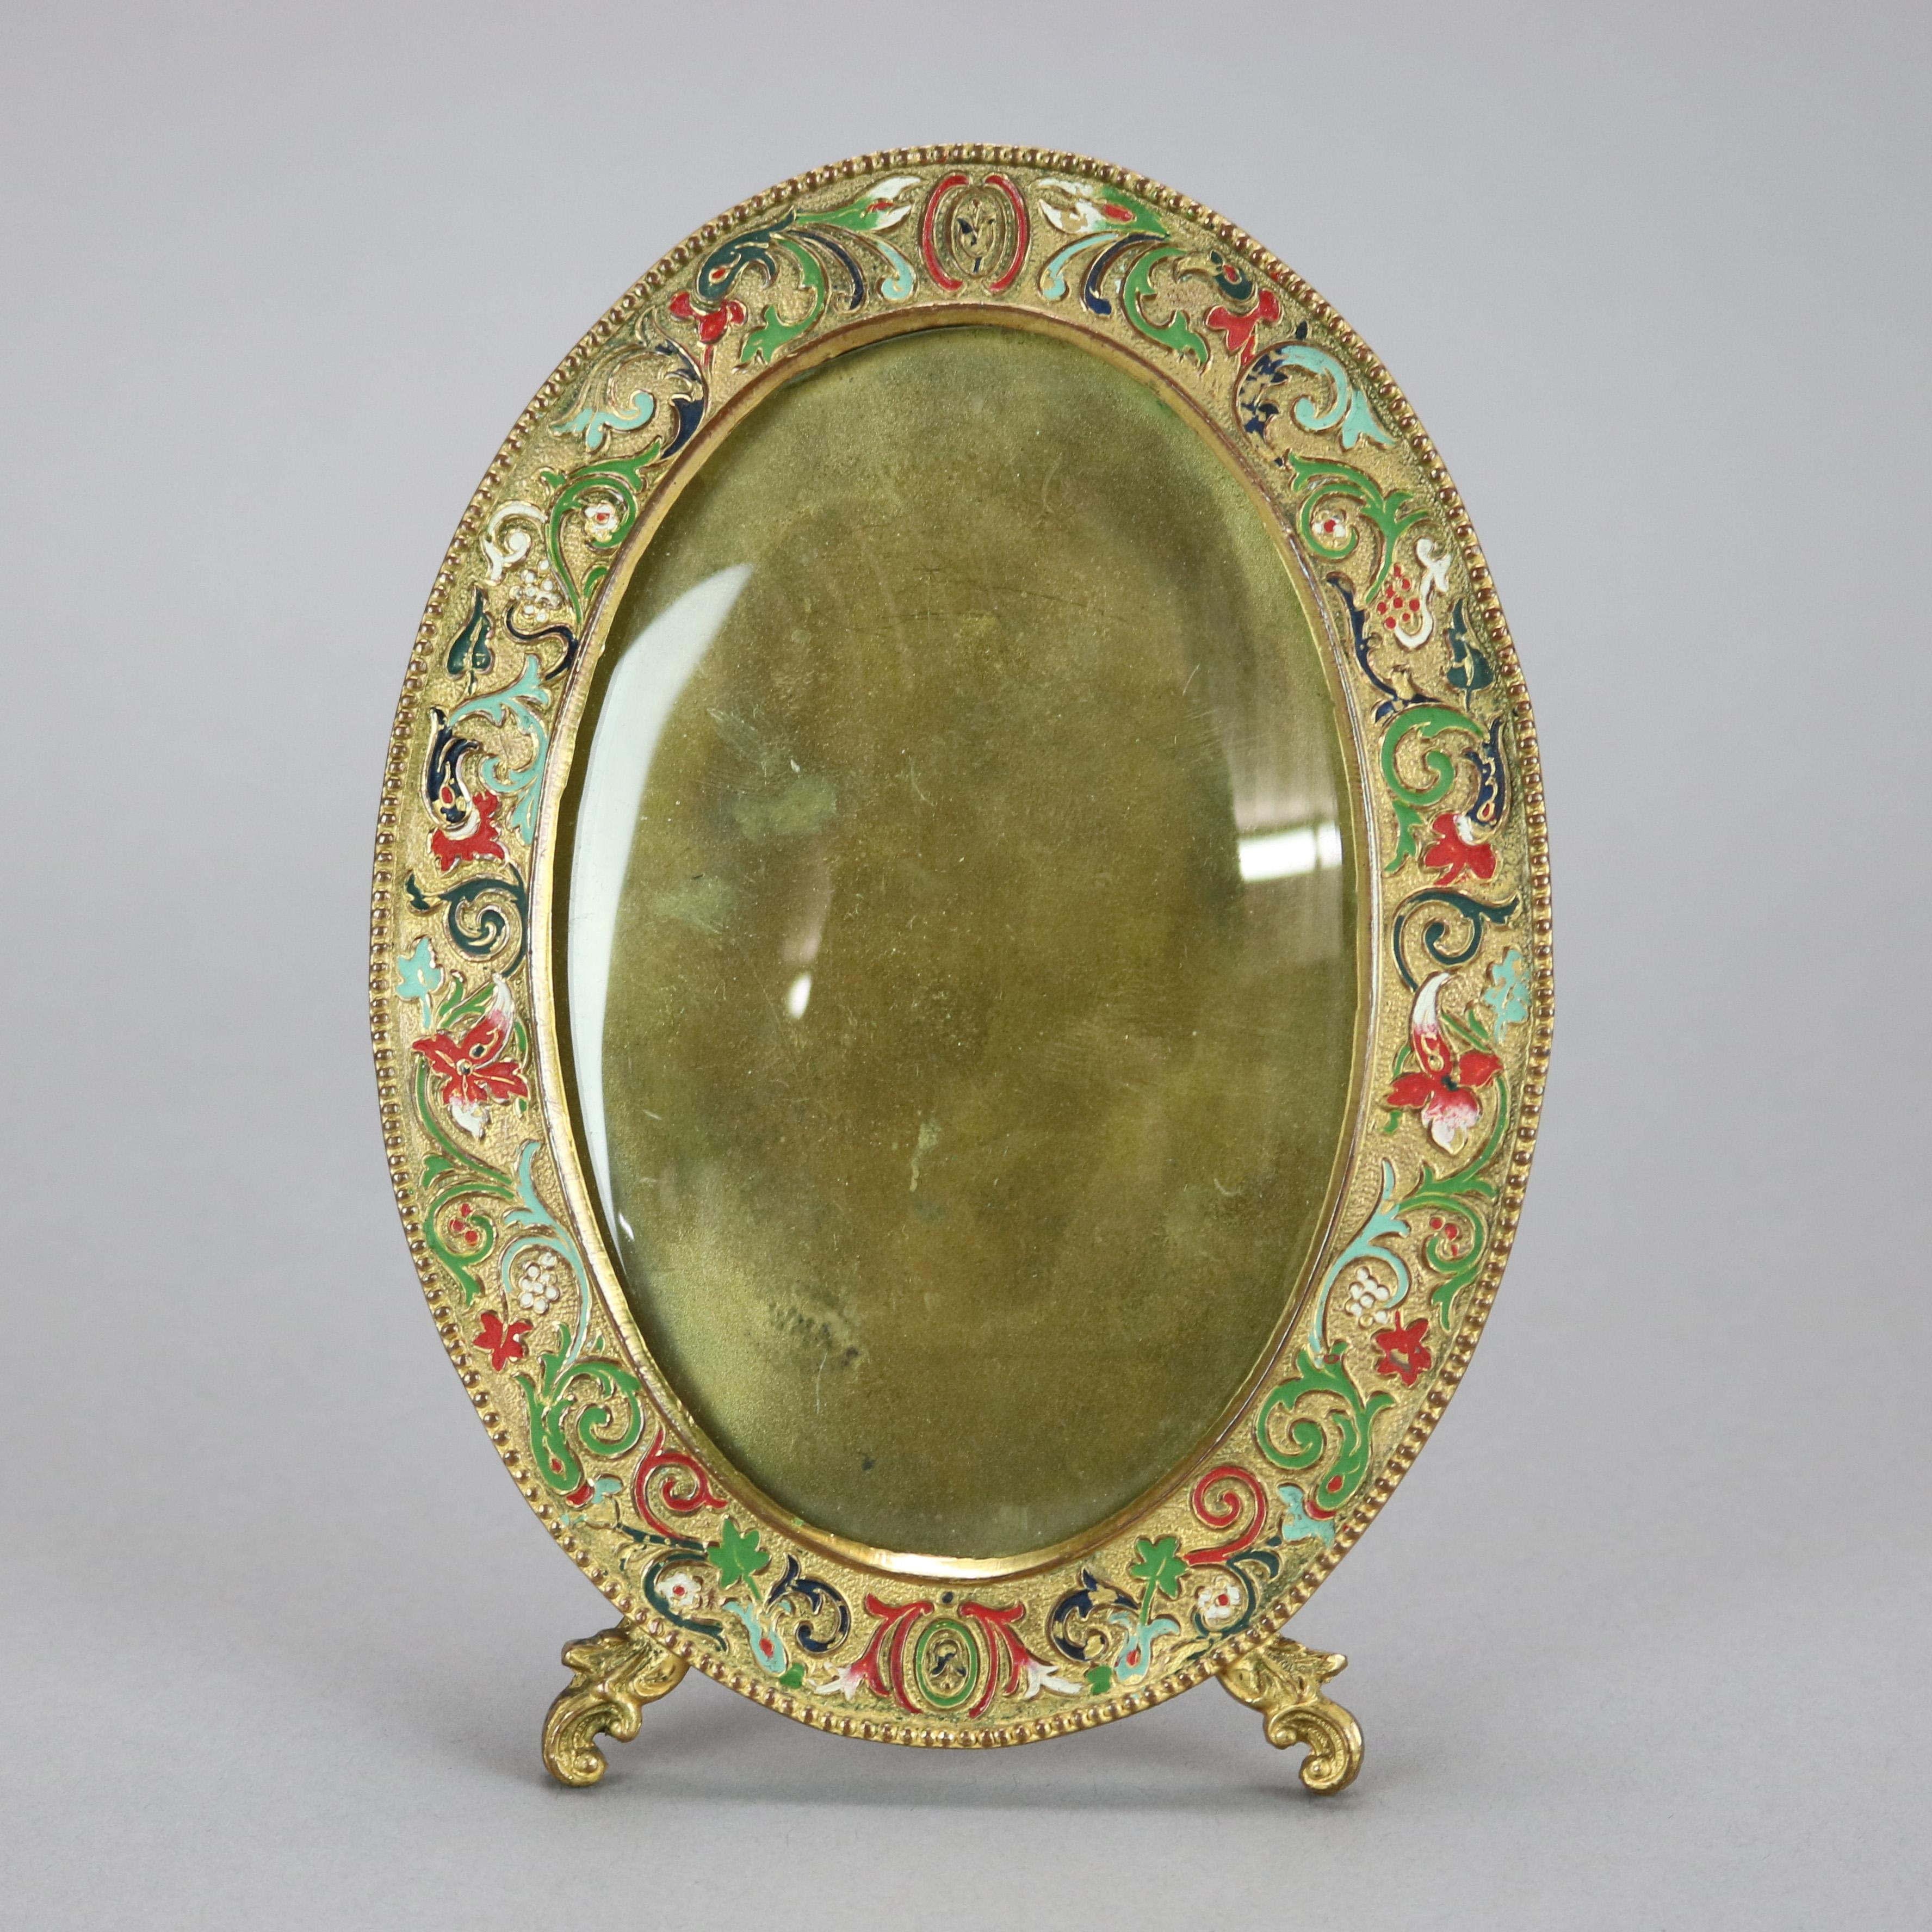 An antique Art Nouveau table top picture frame by AMW (Art Metal Works) offers gold plated exterior with scroll, floral and foliate enameled decoration with bead bordering, c1900

Measures - 7.25''H x 5.25''W x .5''D.